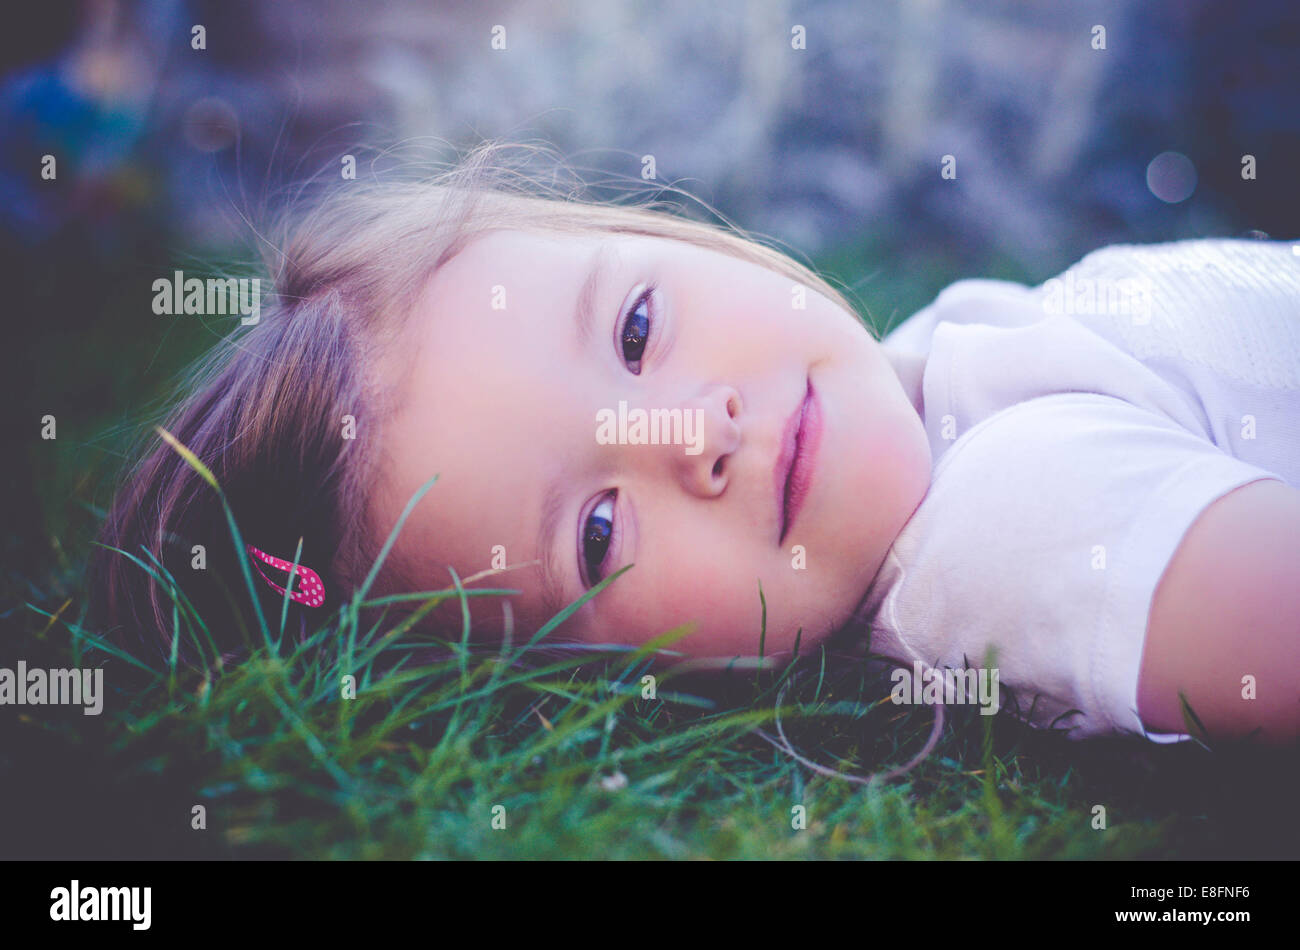 Portrait of a smiling girl lying on grass Banque D'Images